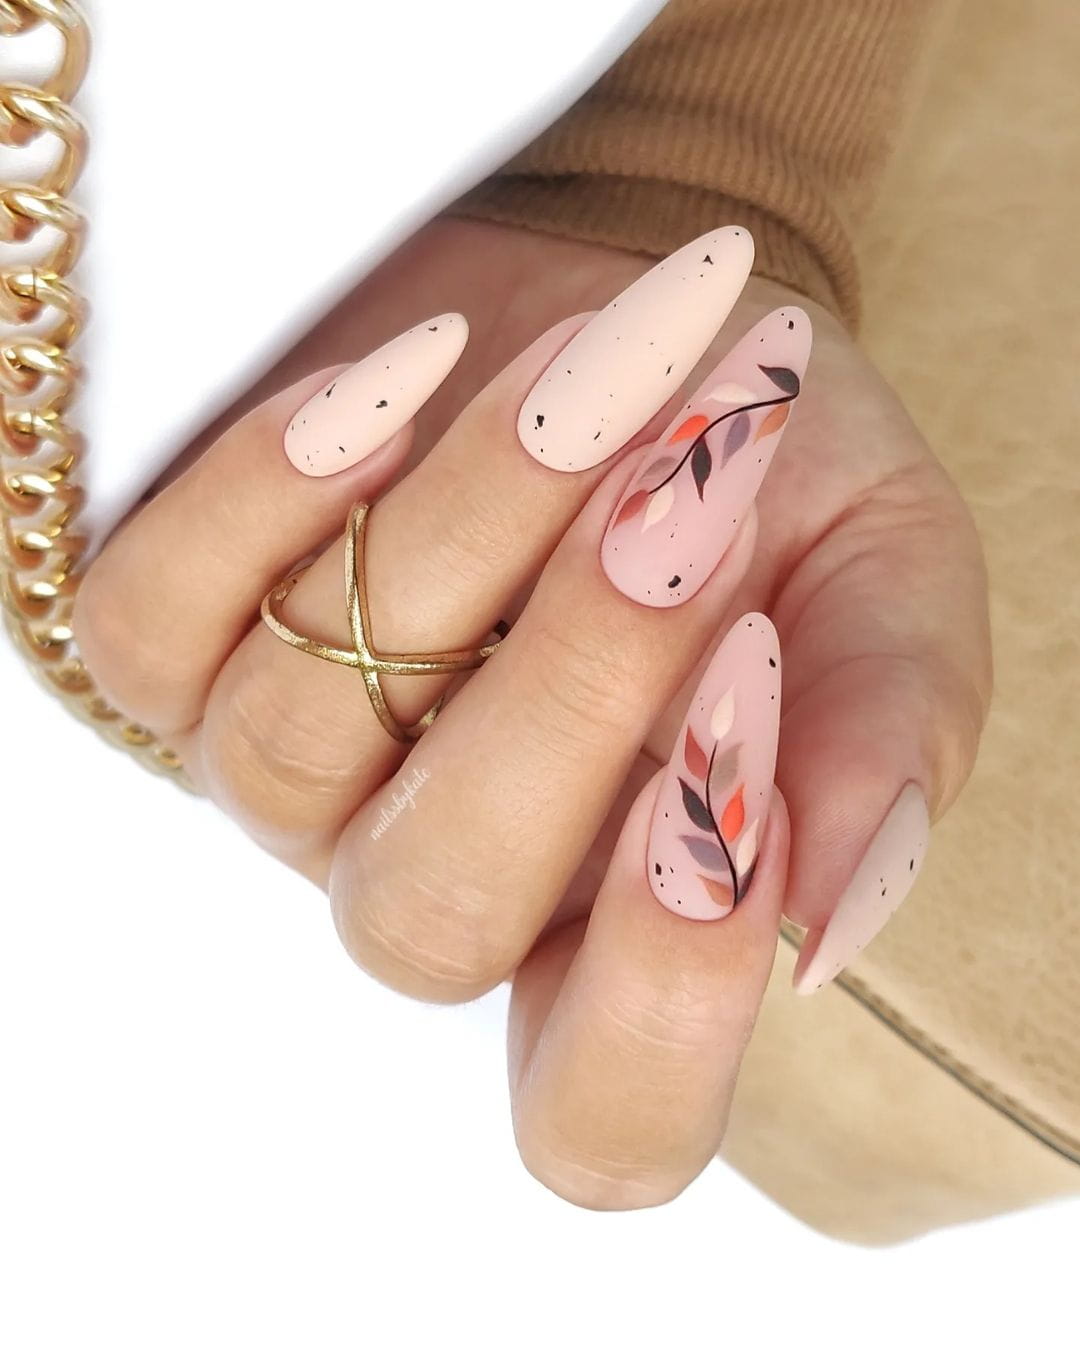 100+ Best Winter Nail Ideas And Designs To Try images 9